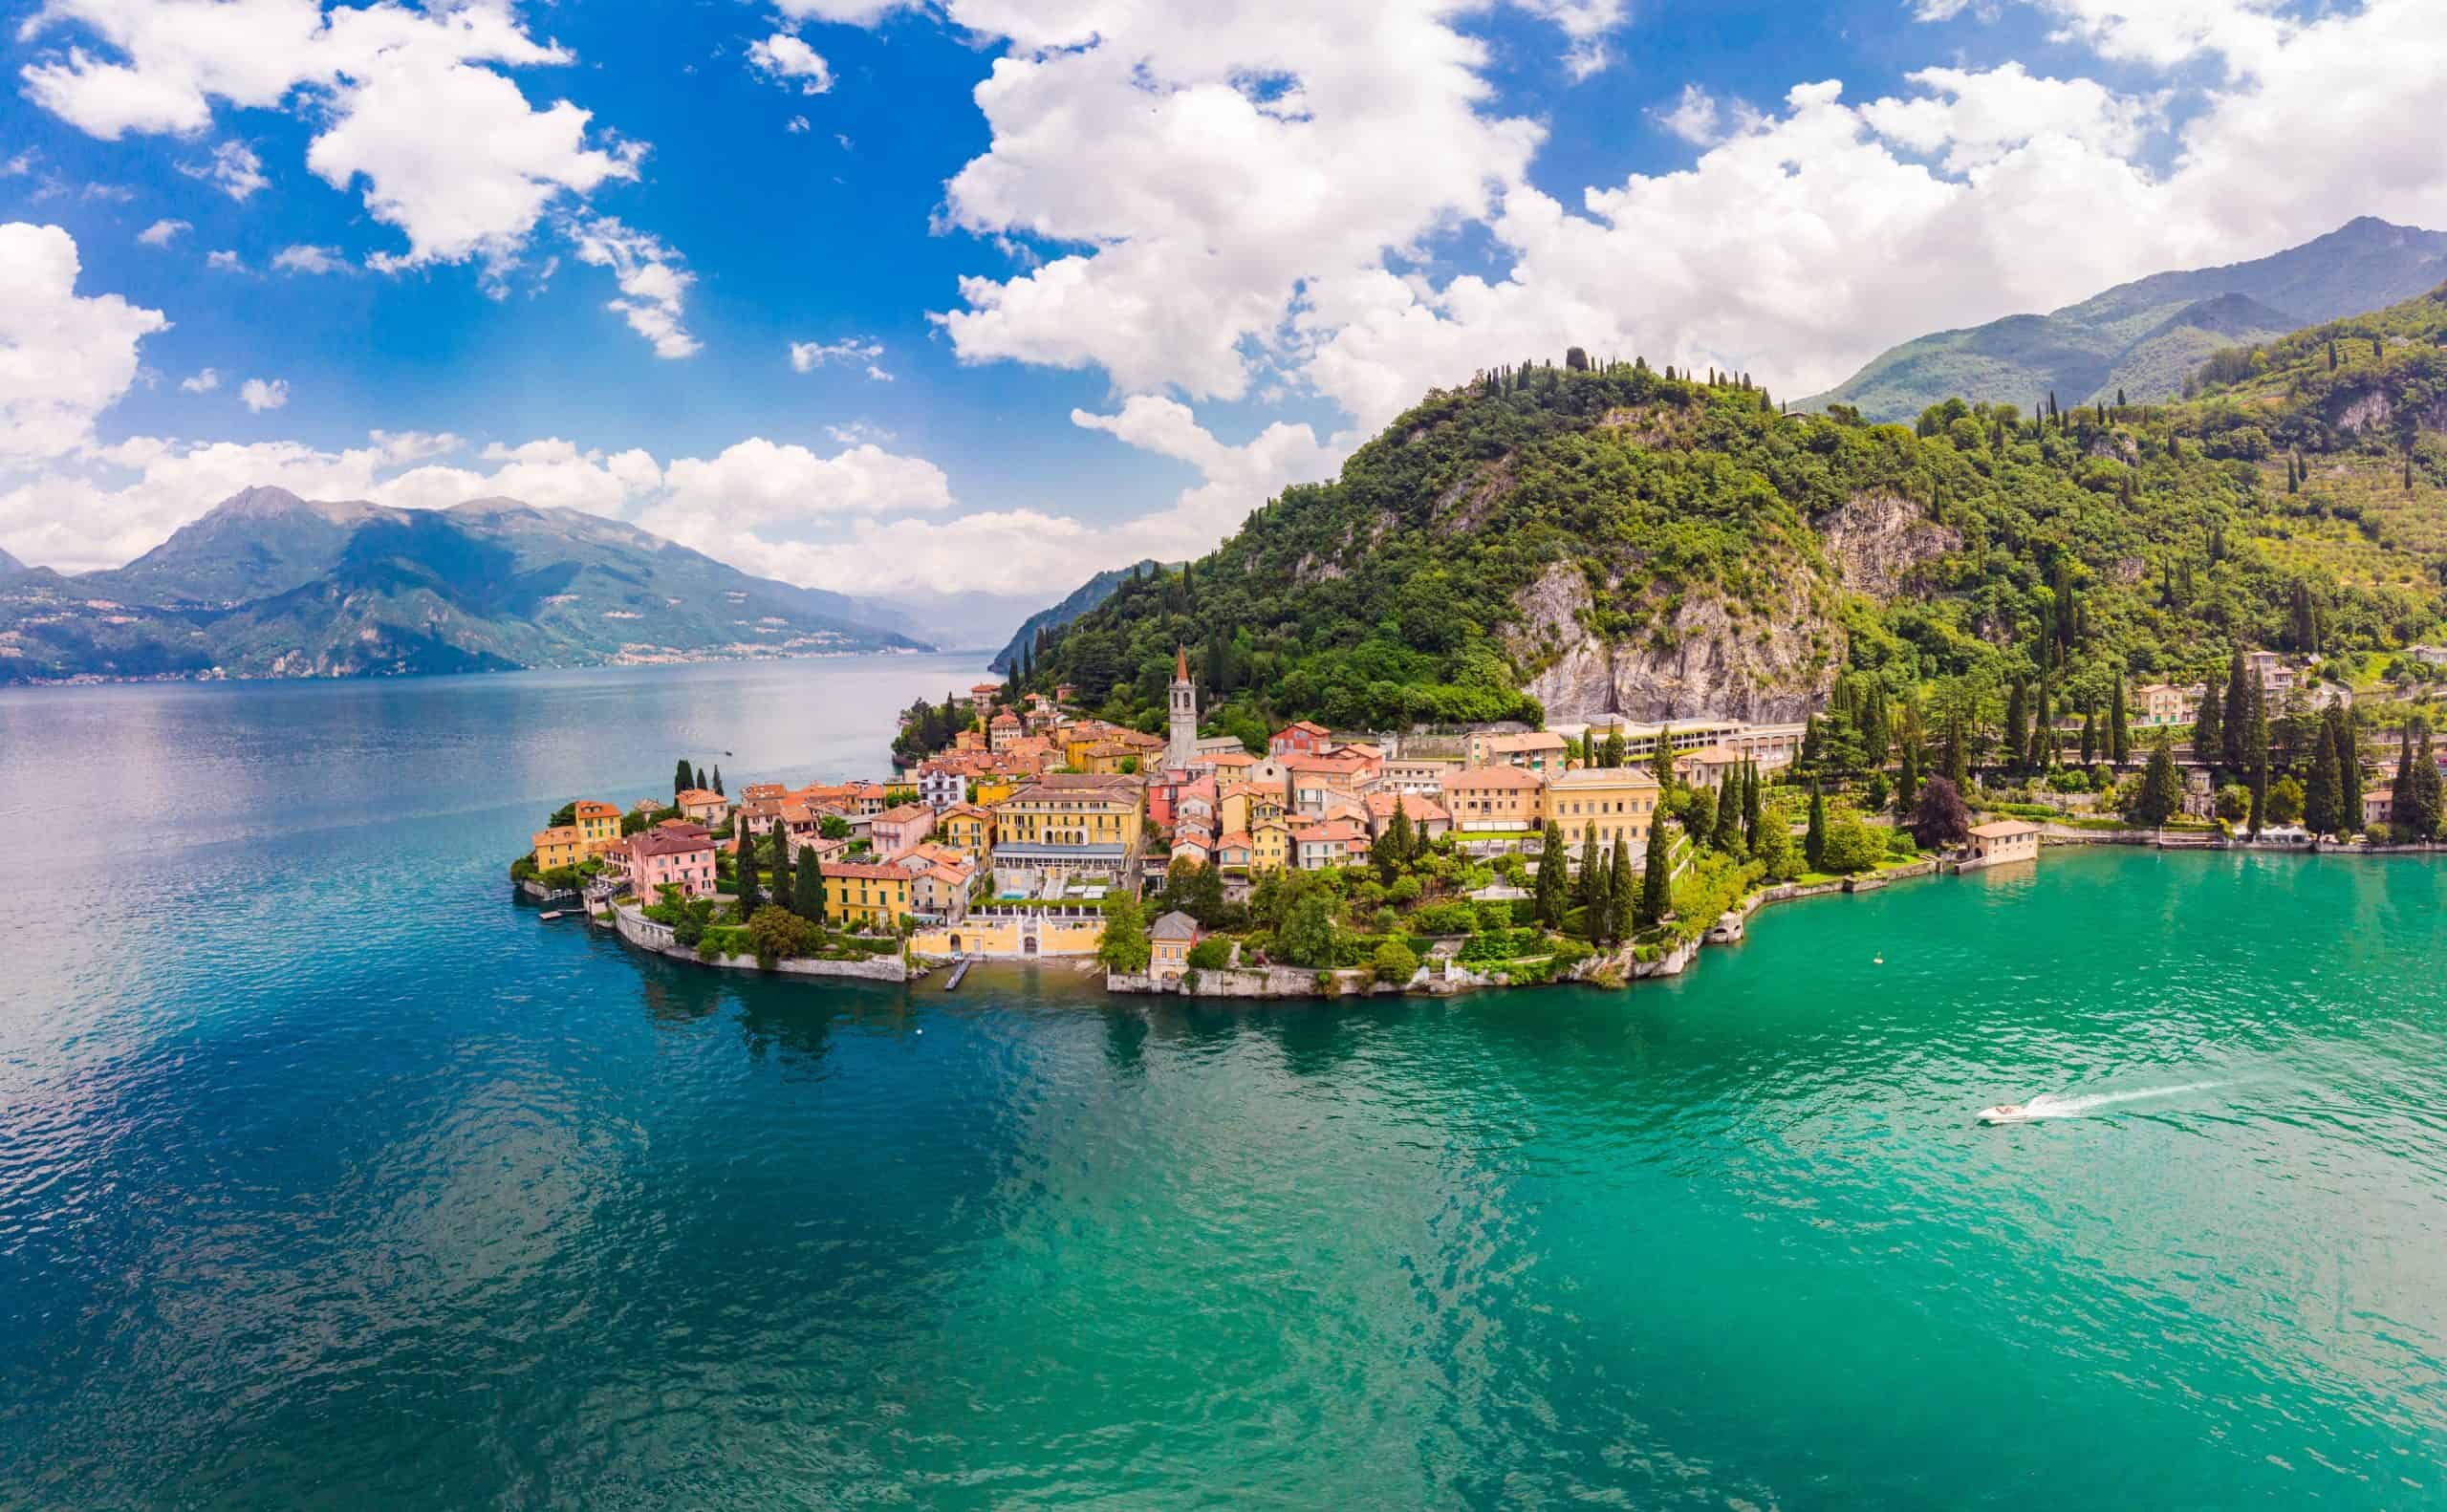 View from above of an ancient village of lake como, perfect for a destinatoin wedding.